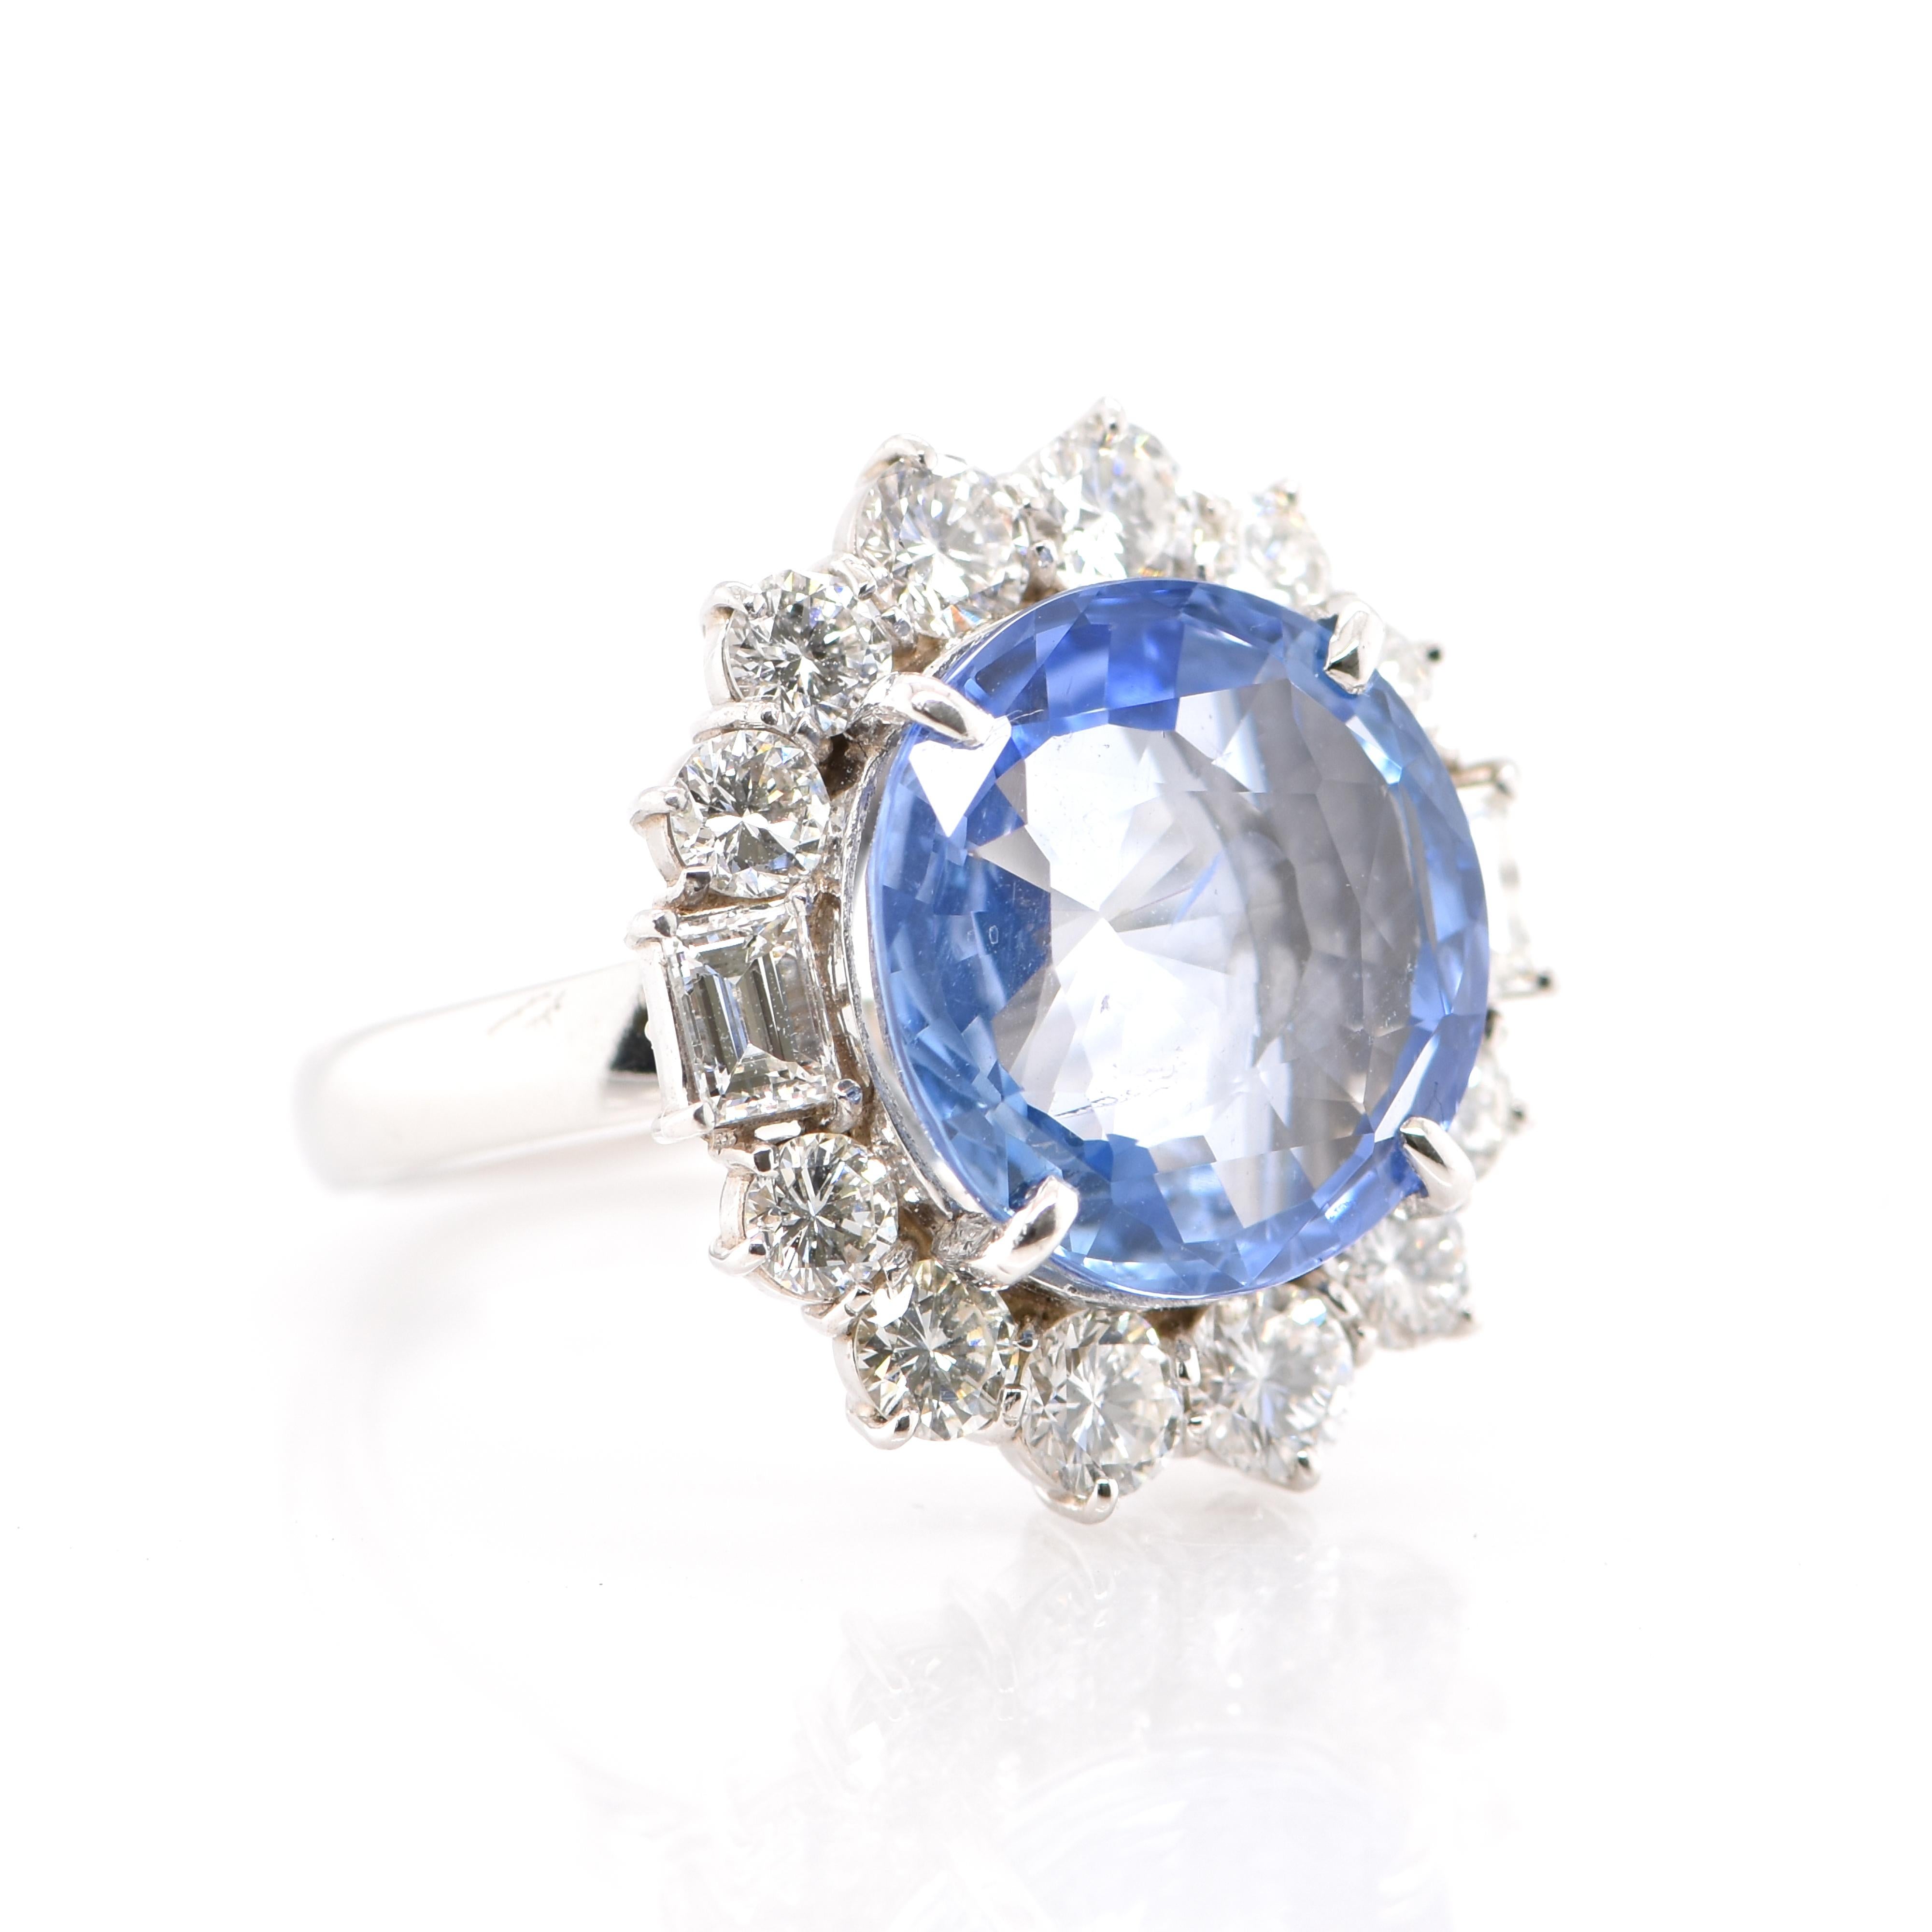 Modern 10.07 Carat Natural, Untreated Sapphire and Diamond Ring Set in Platinum